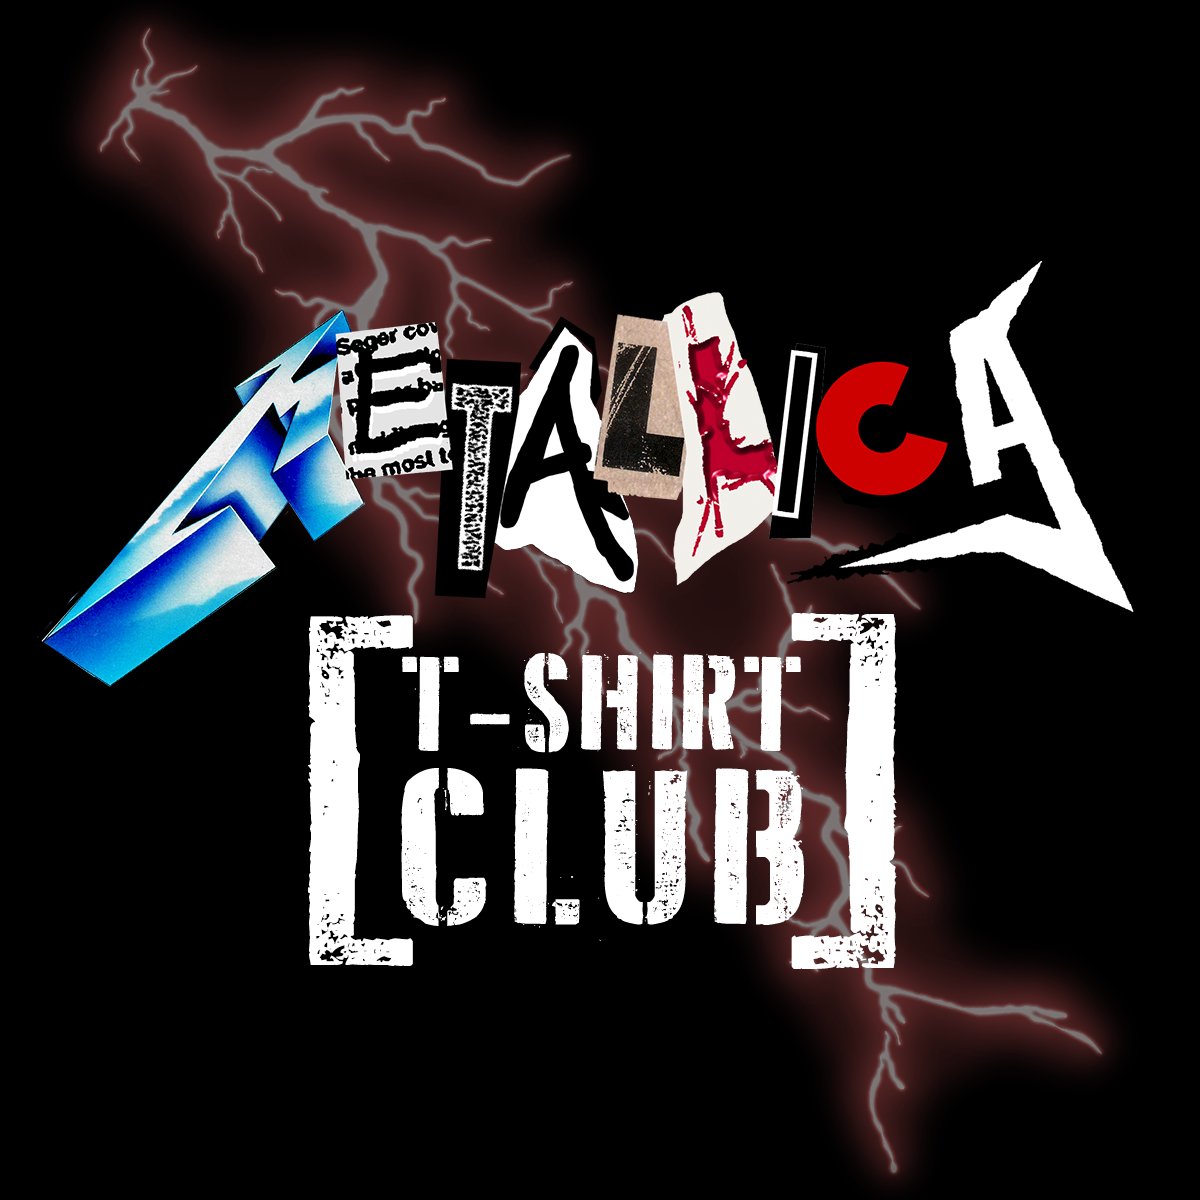 Last call for the Metallica T-Shirt Club!

Don’t forget to join by this Friday at 11:59 PM PT to get your hands on exclusive designs from old tour dates, crew shirts, and more! Each shirt will include new sleeve tags and exclusive packaging.

Memberships are available with